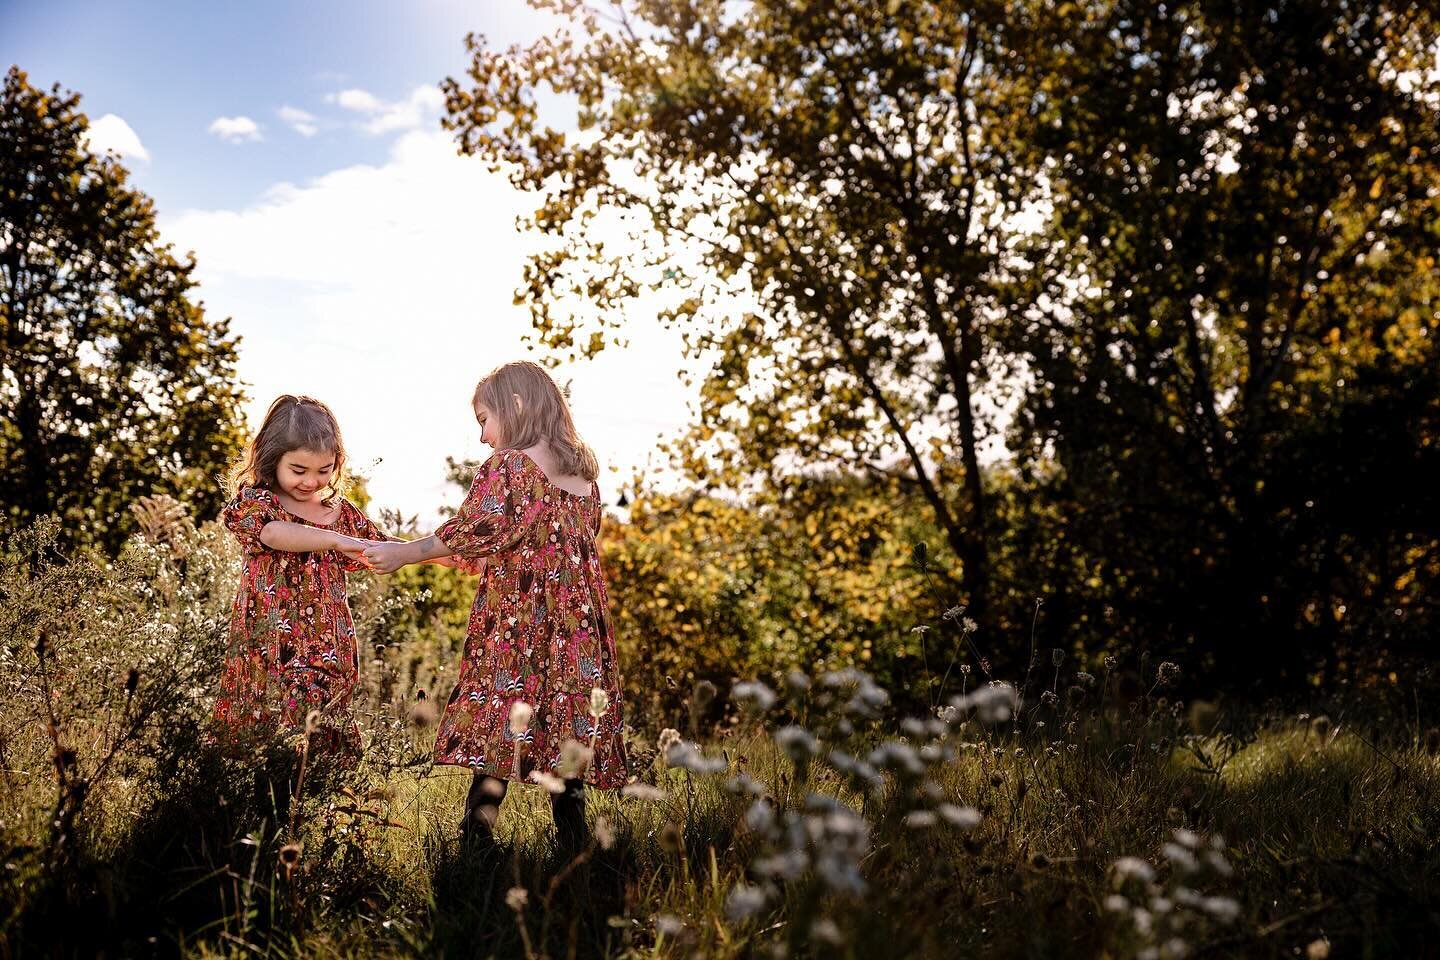 Love shooting amazing new families! These two 🥰🥰 #fallfamilyphotos #tinydancers #sunrisesession